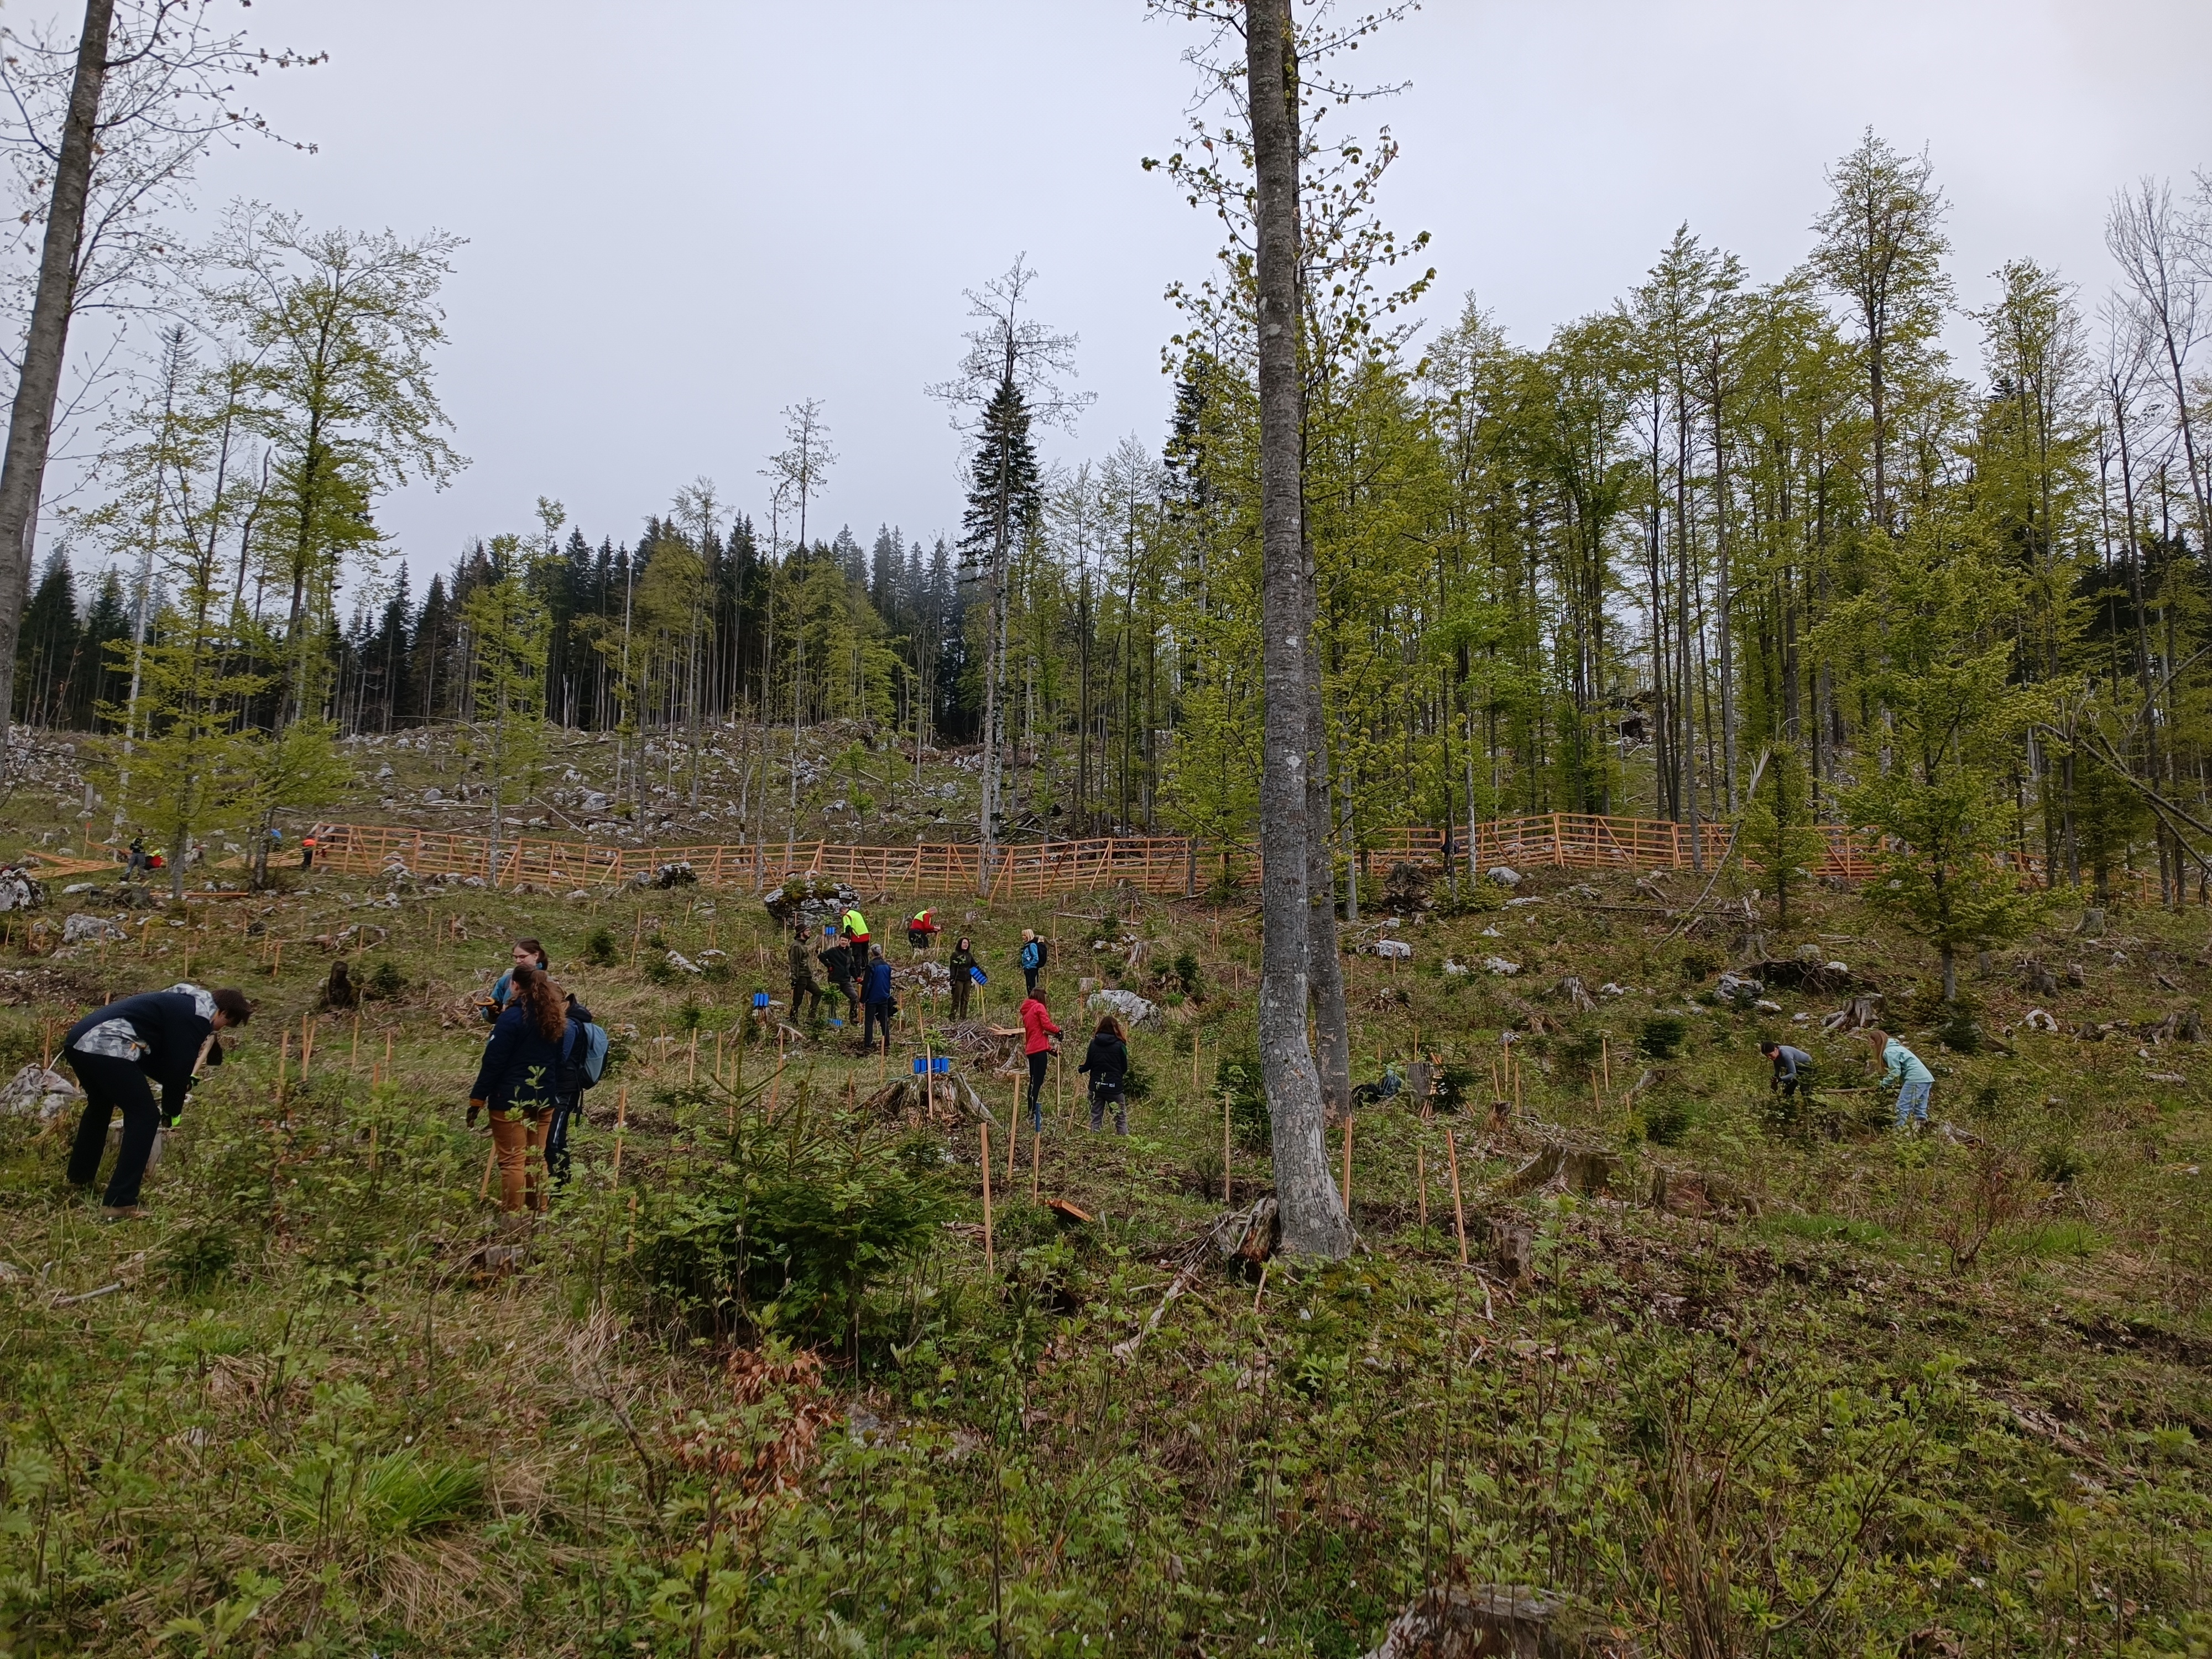 An unforested hillside in the middle of a forest, surrounded by a wooden fence and a group of people planting young conifers